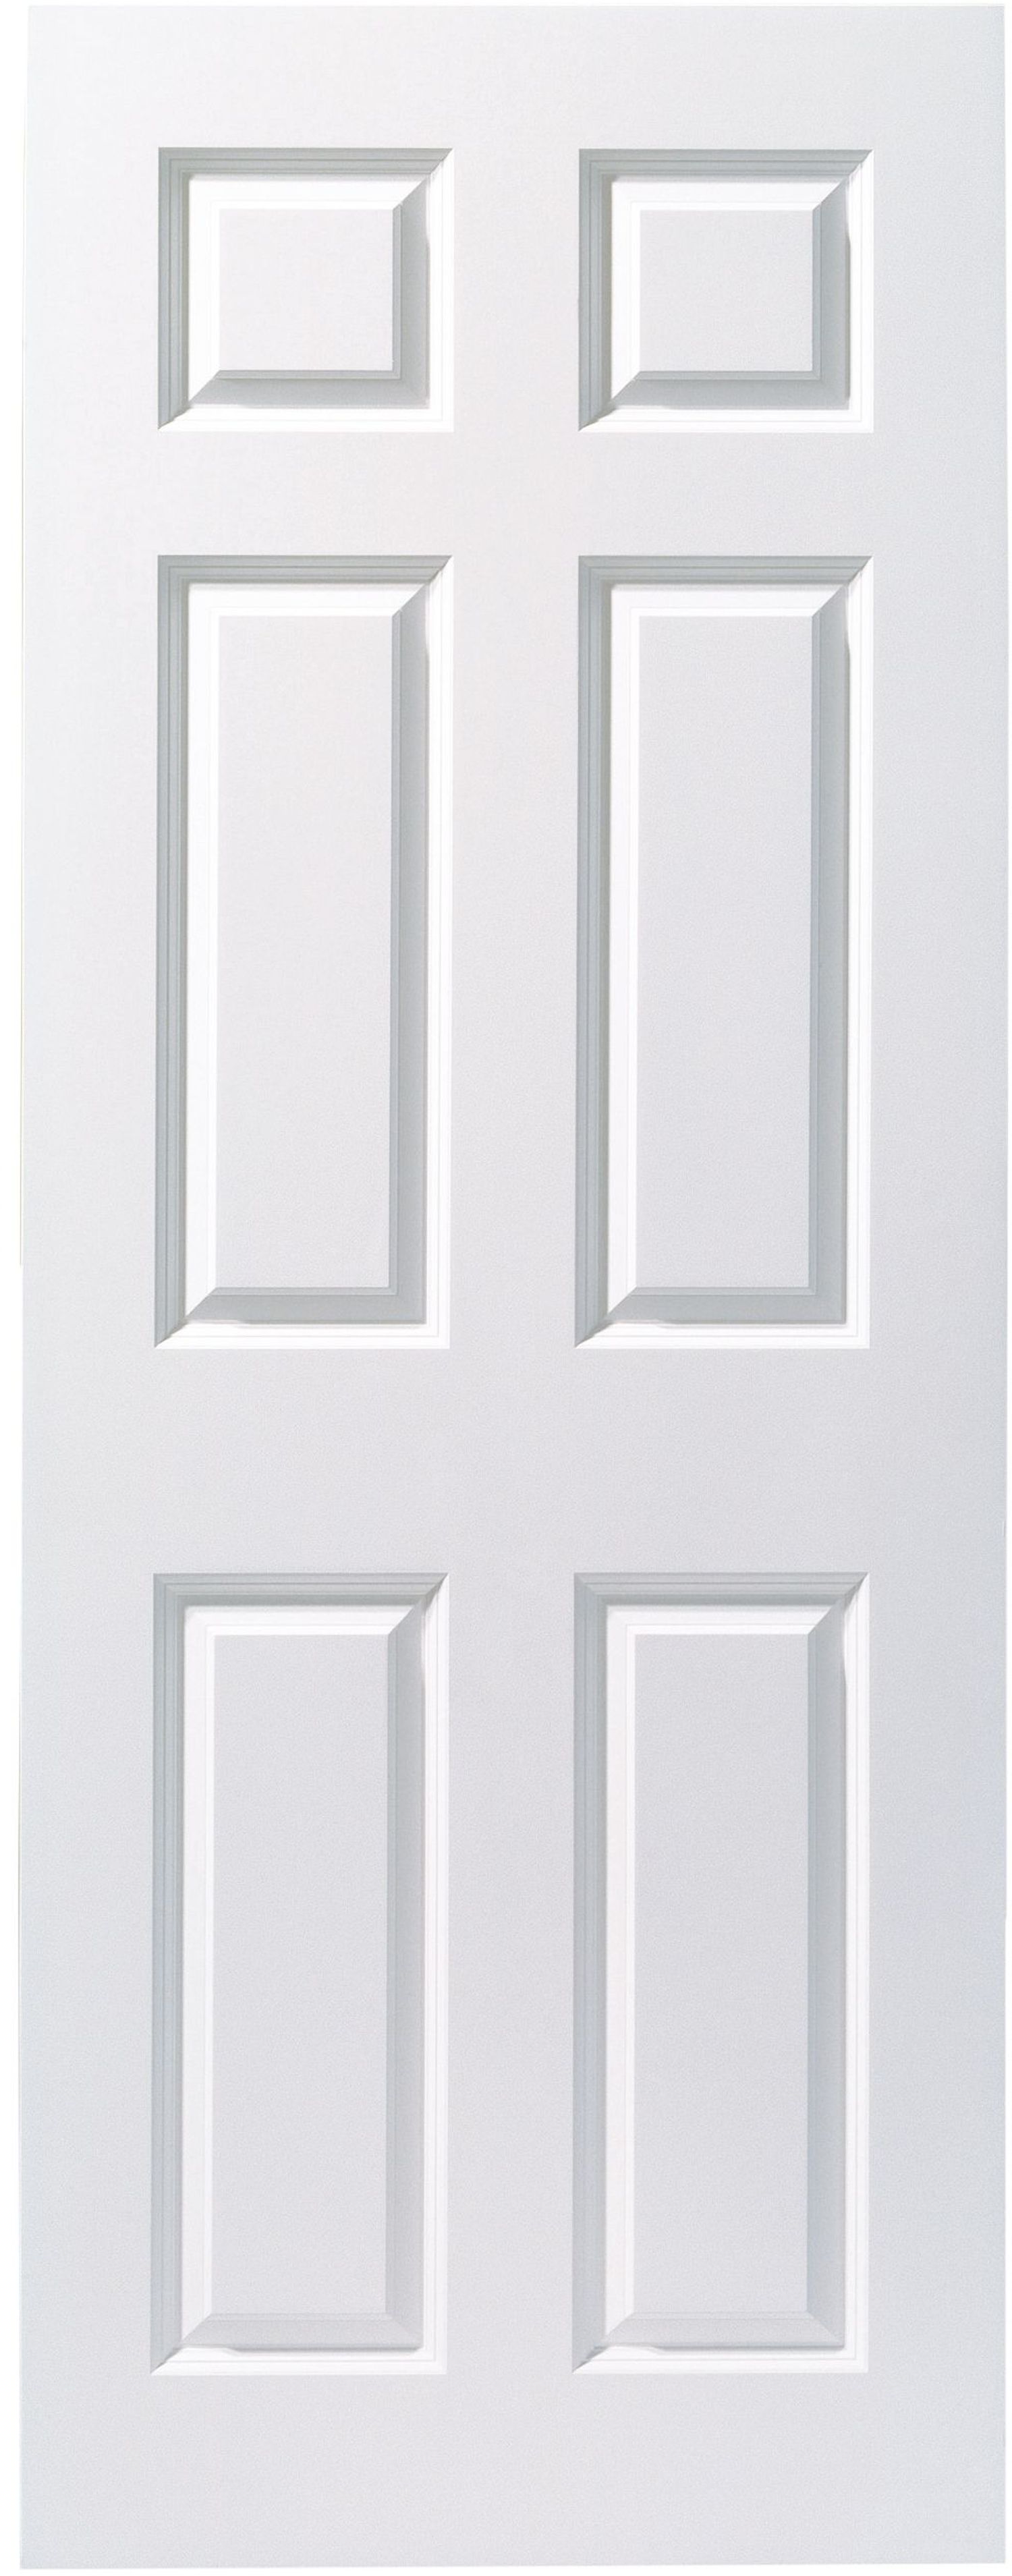 Wickes Lincoln White Smooth Moulded 6 Panel Internal Fire Door - 1981mm